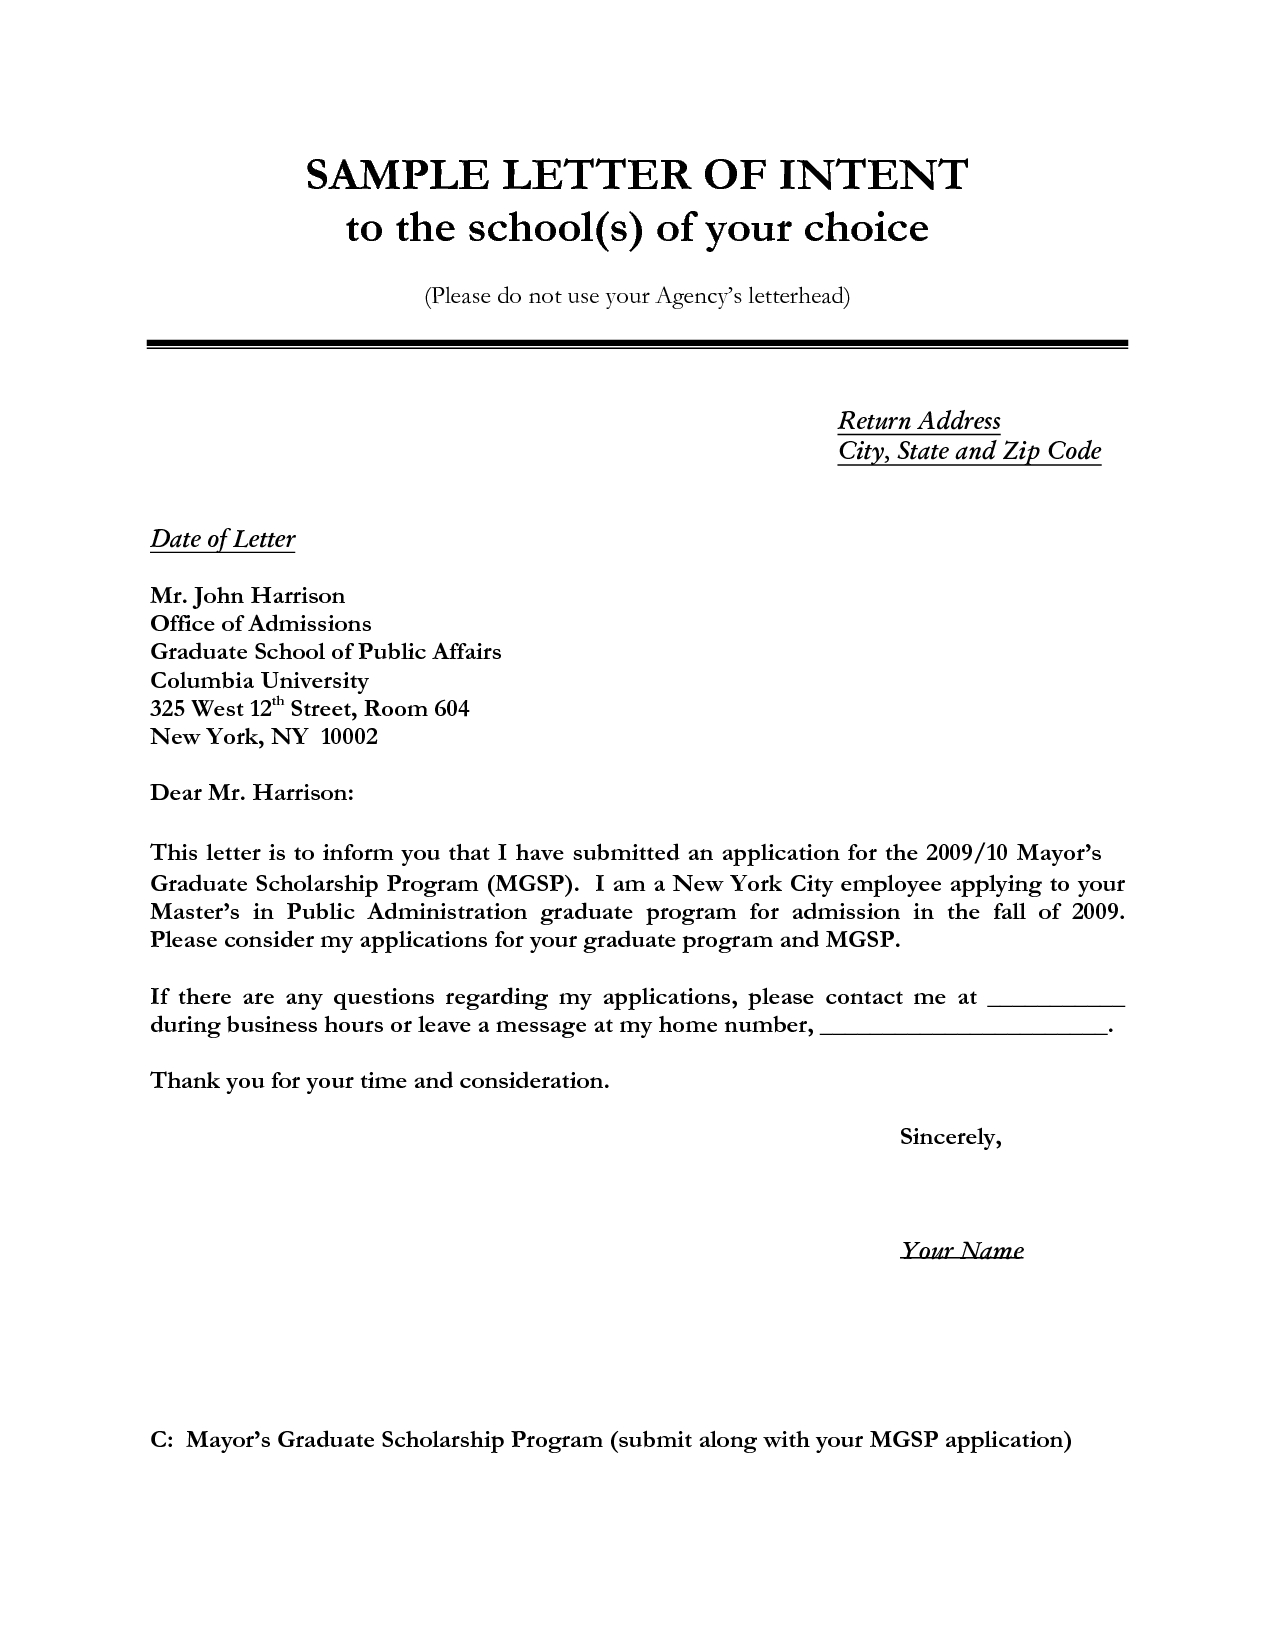 Letter Of Intent Investment Template - Letter Of Intent Sample